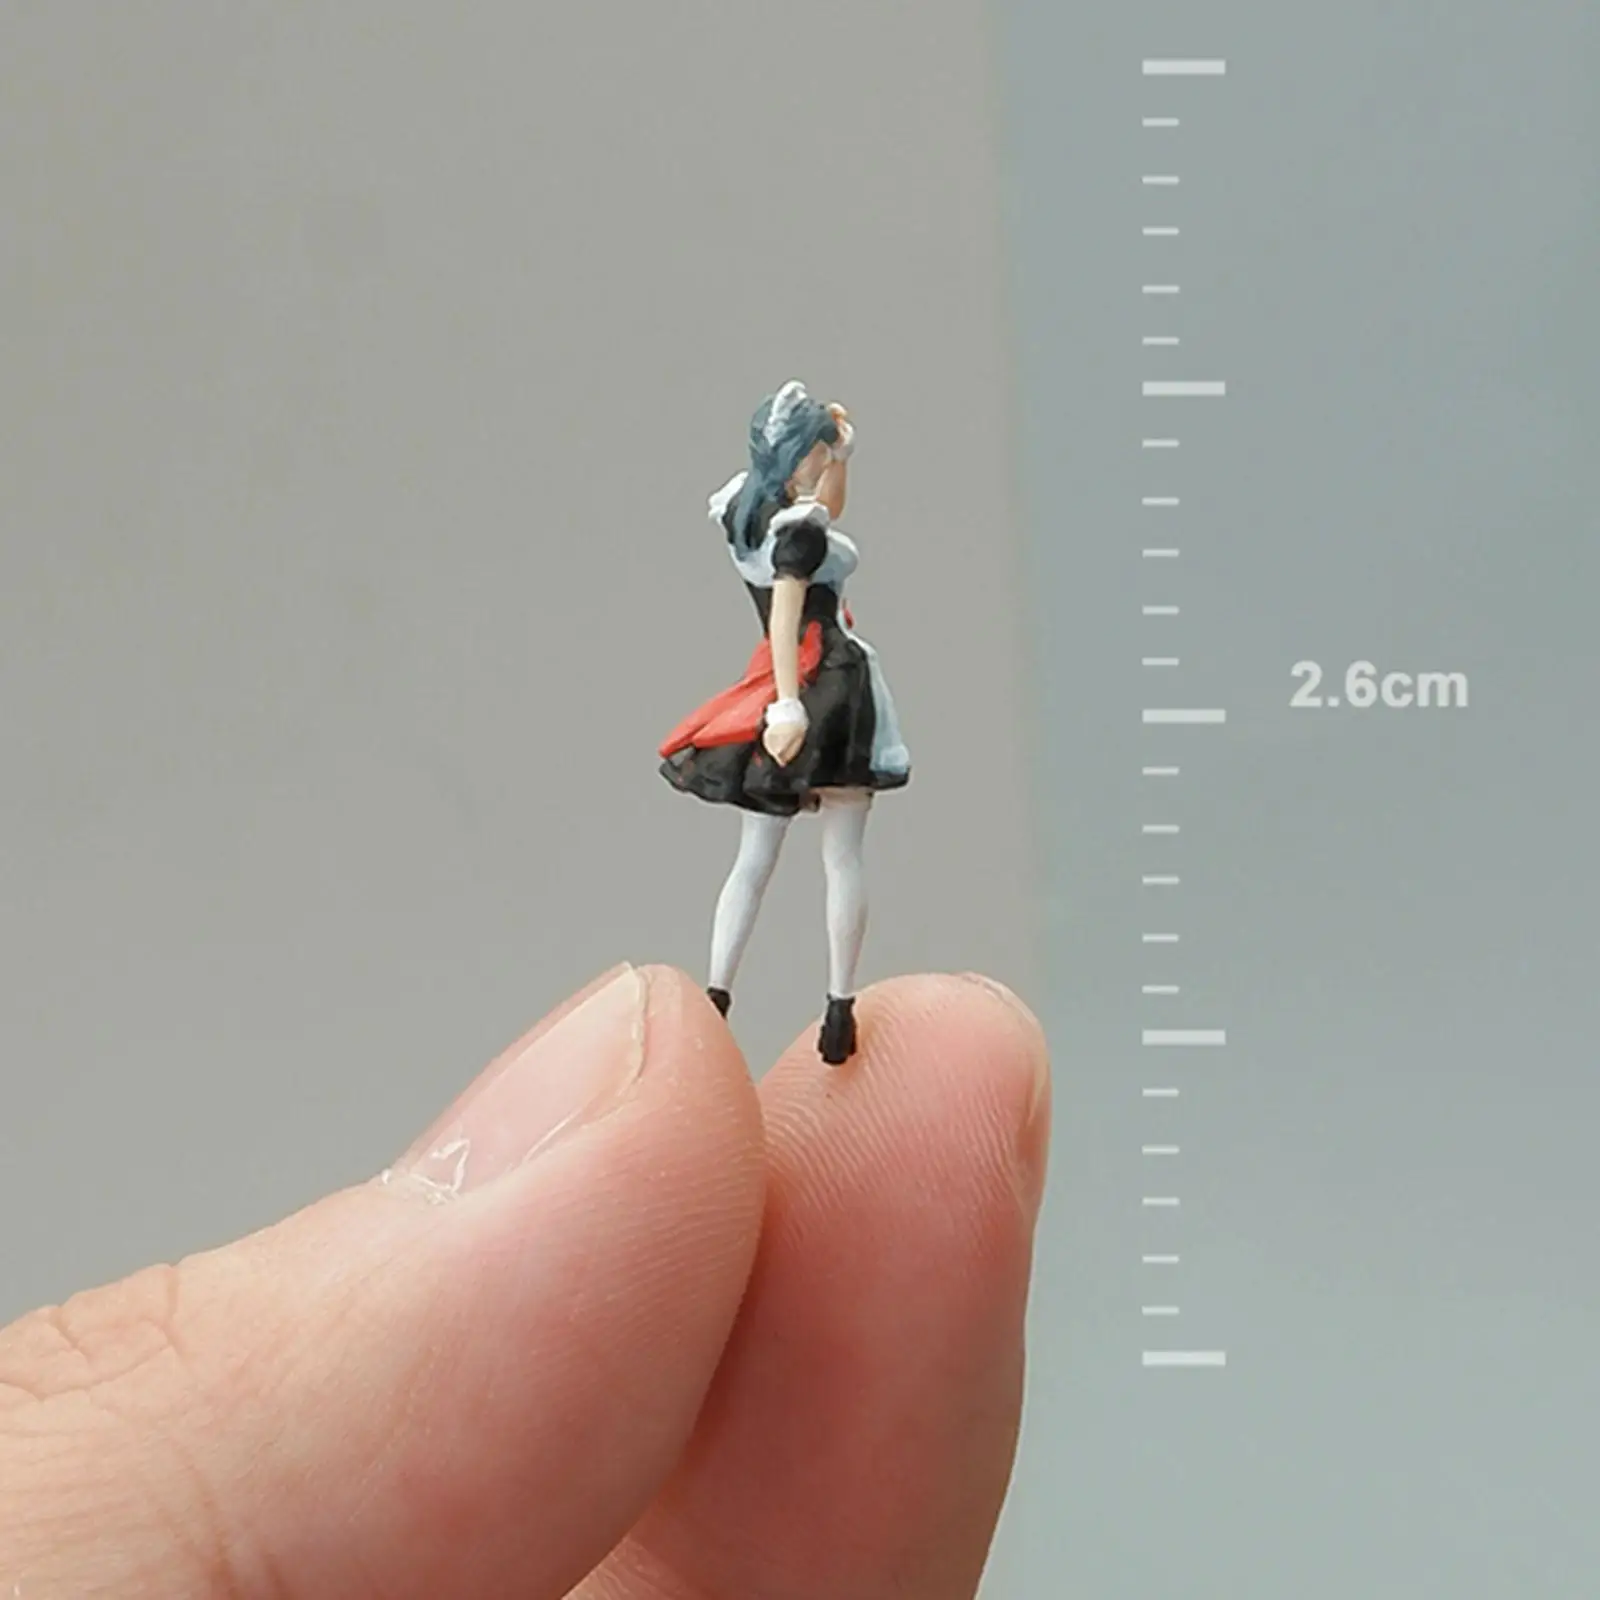 1/64 People Figures Coser Trains Architectural People Figures Collectibles Miniature People Figurines for DIY Scene Accessories